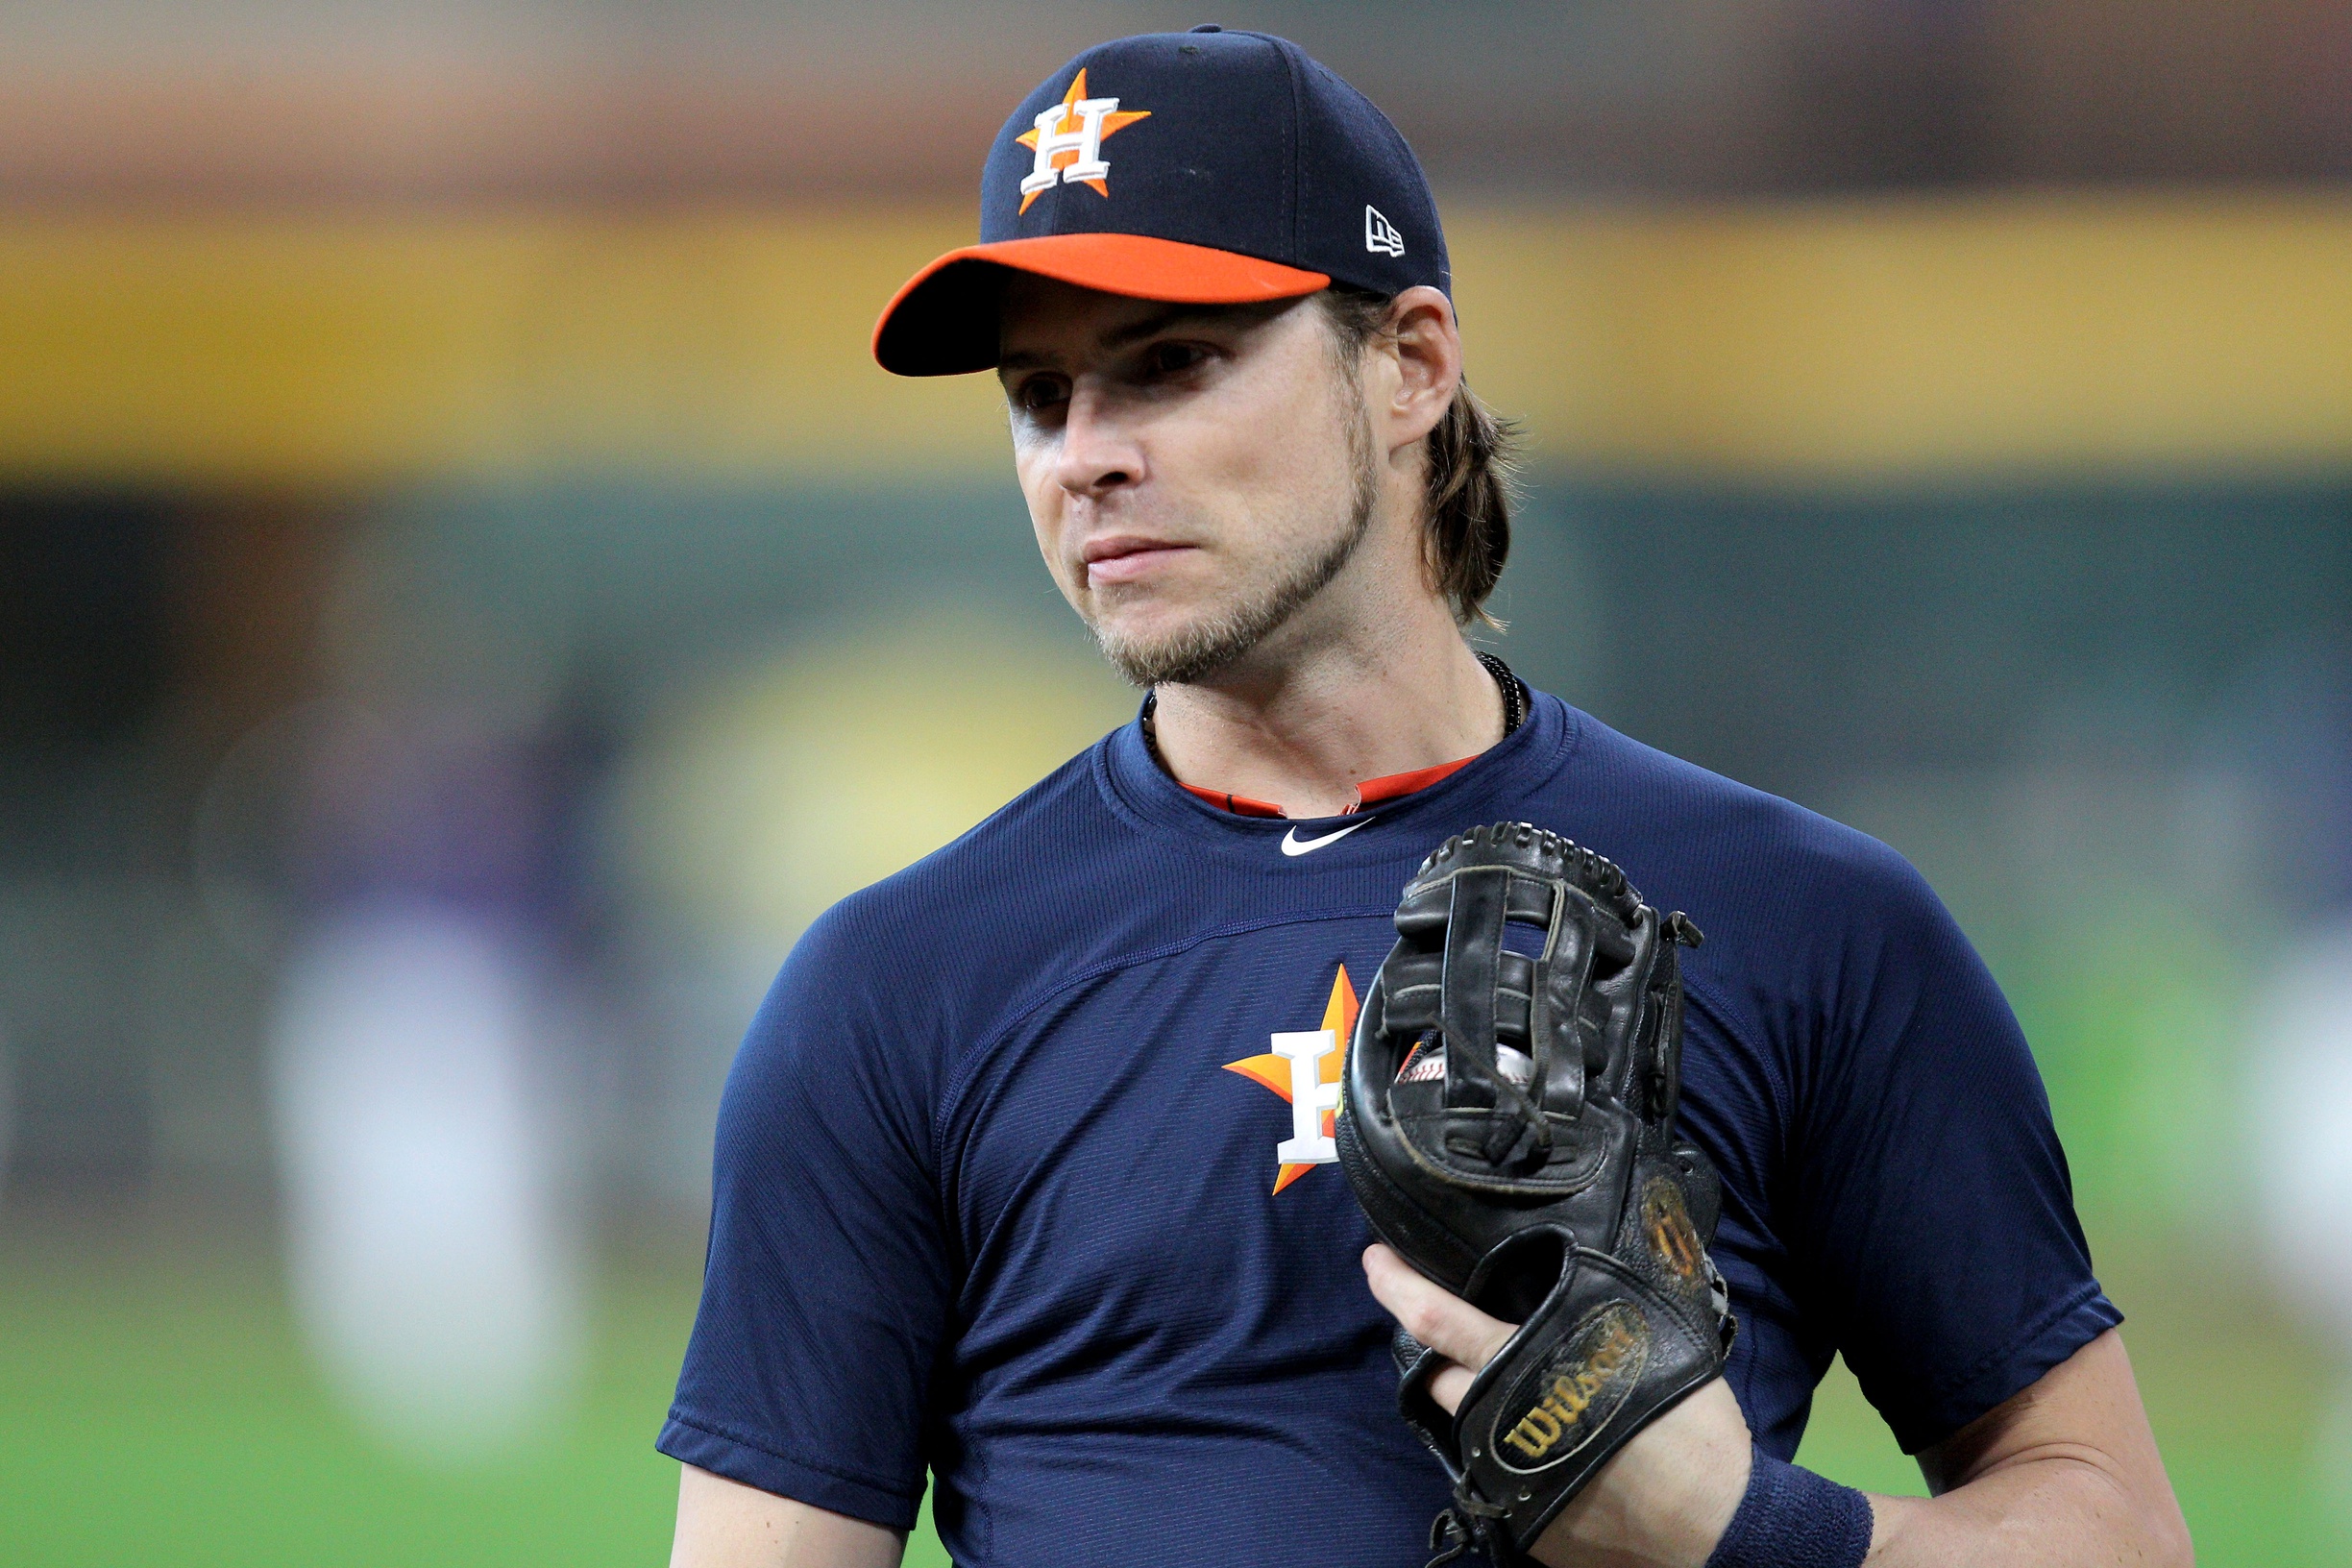 Astros\' Josh Reddick shares fans have wished death upon his child